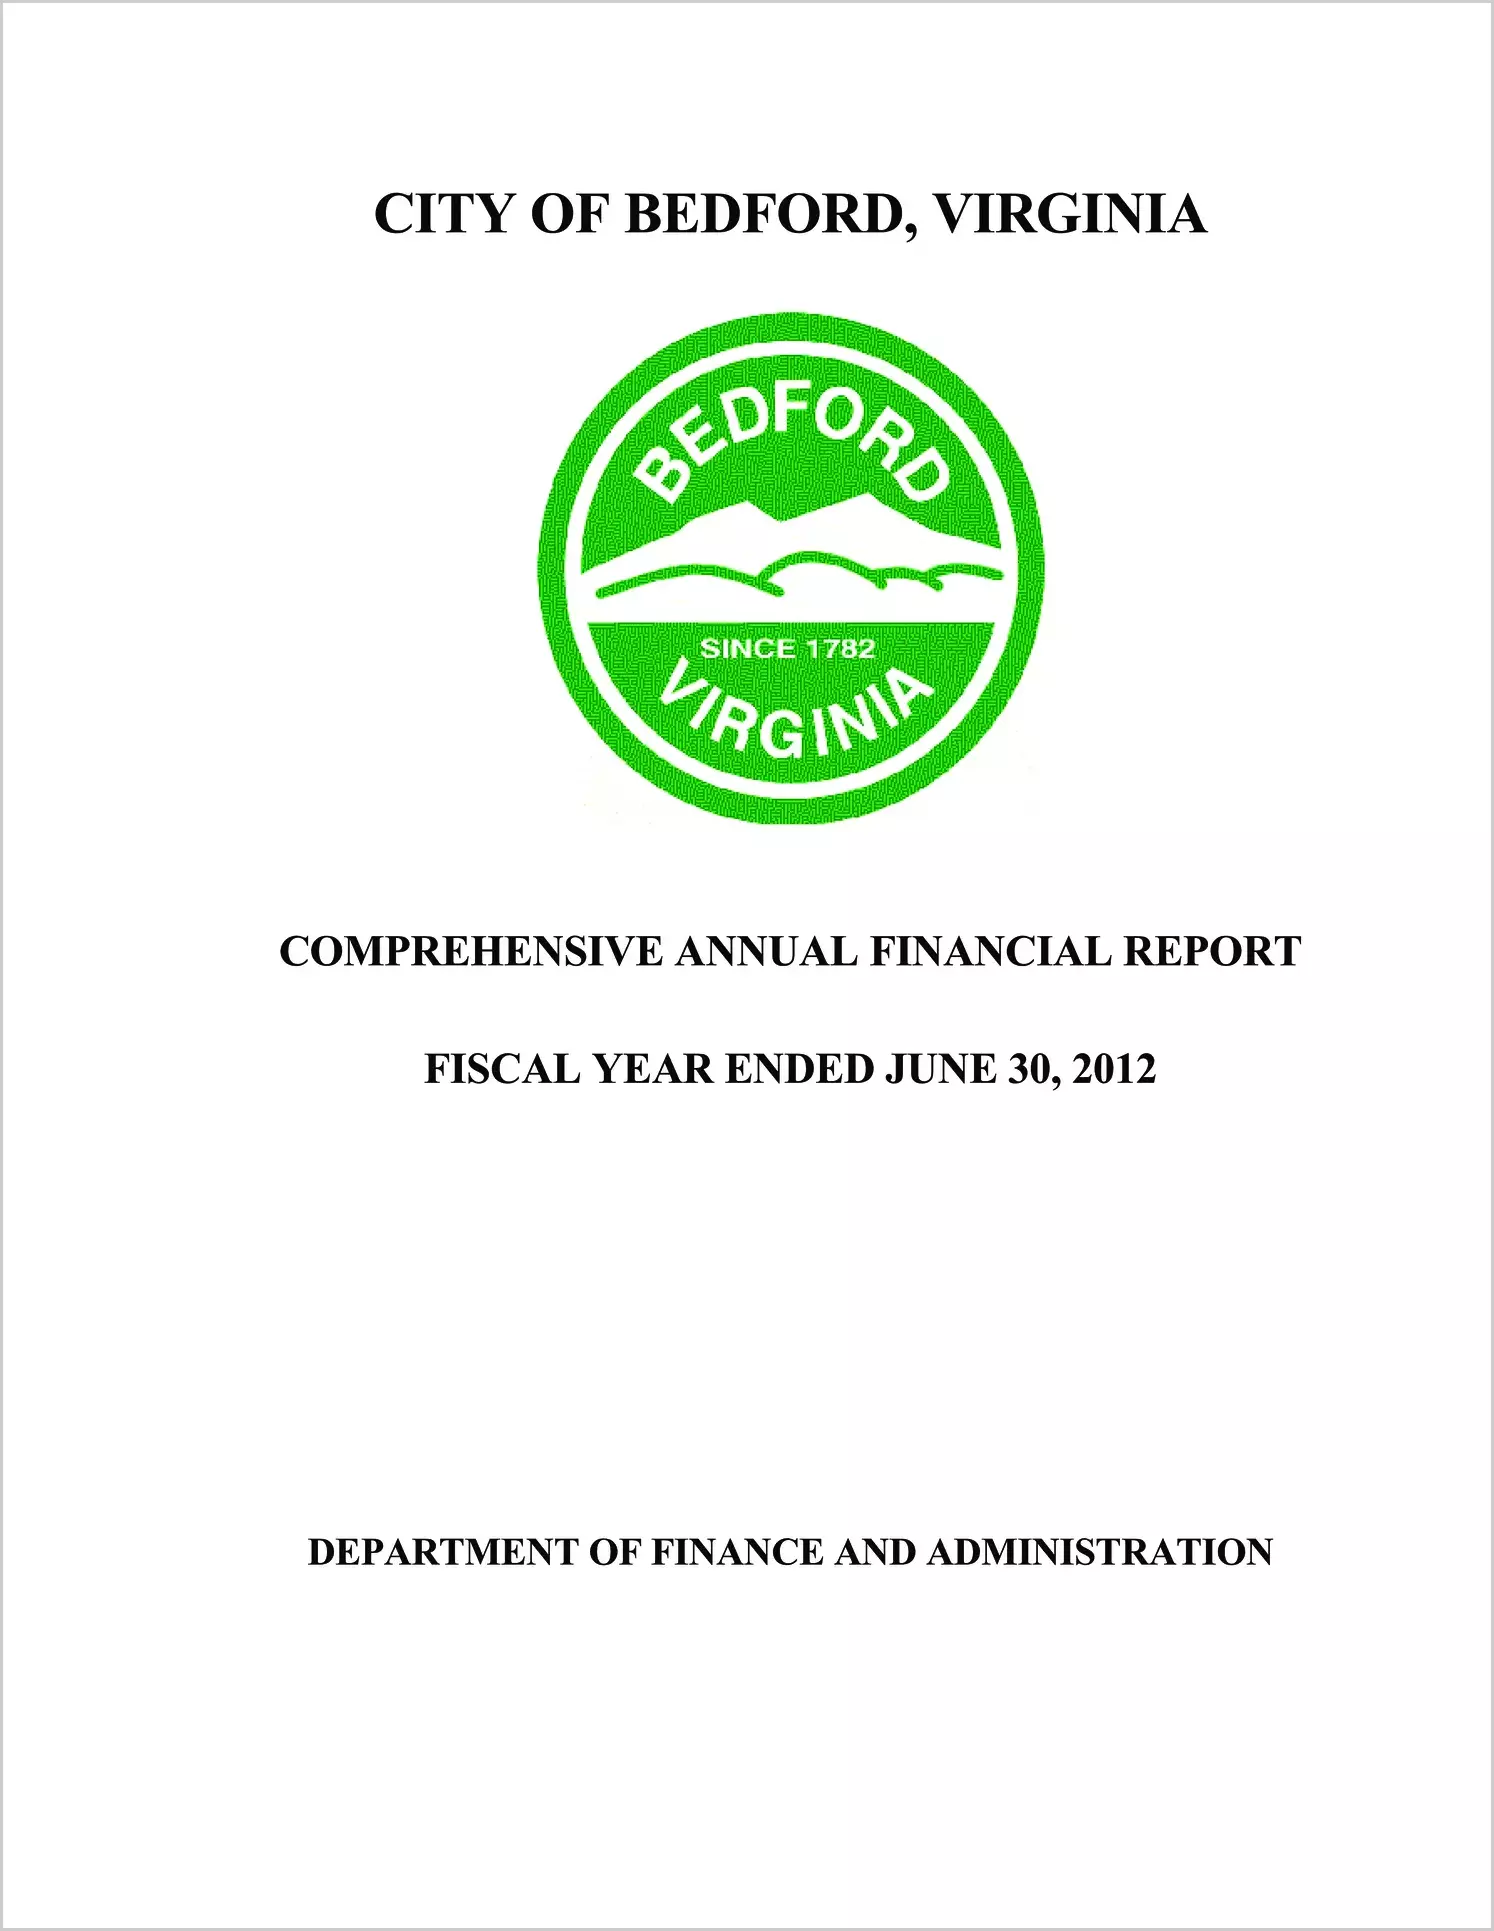 2012 Annual Financial Report for City of Bedford